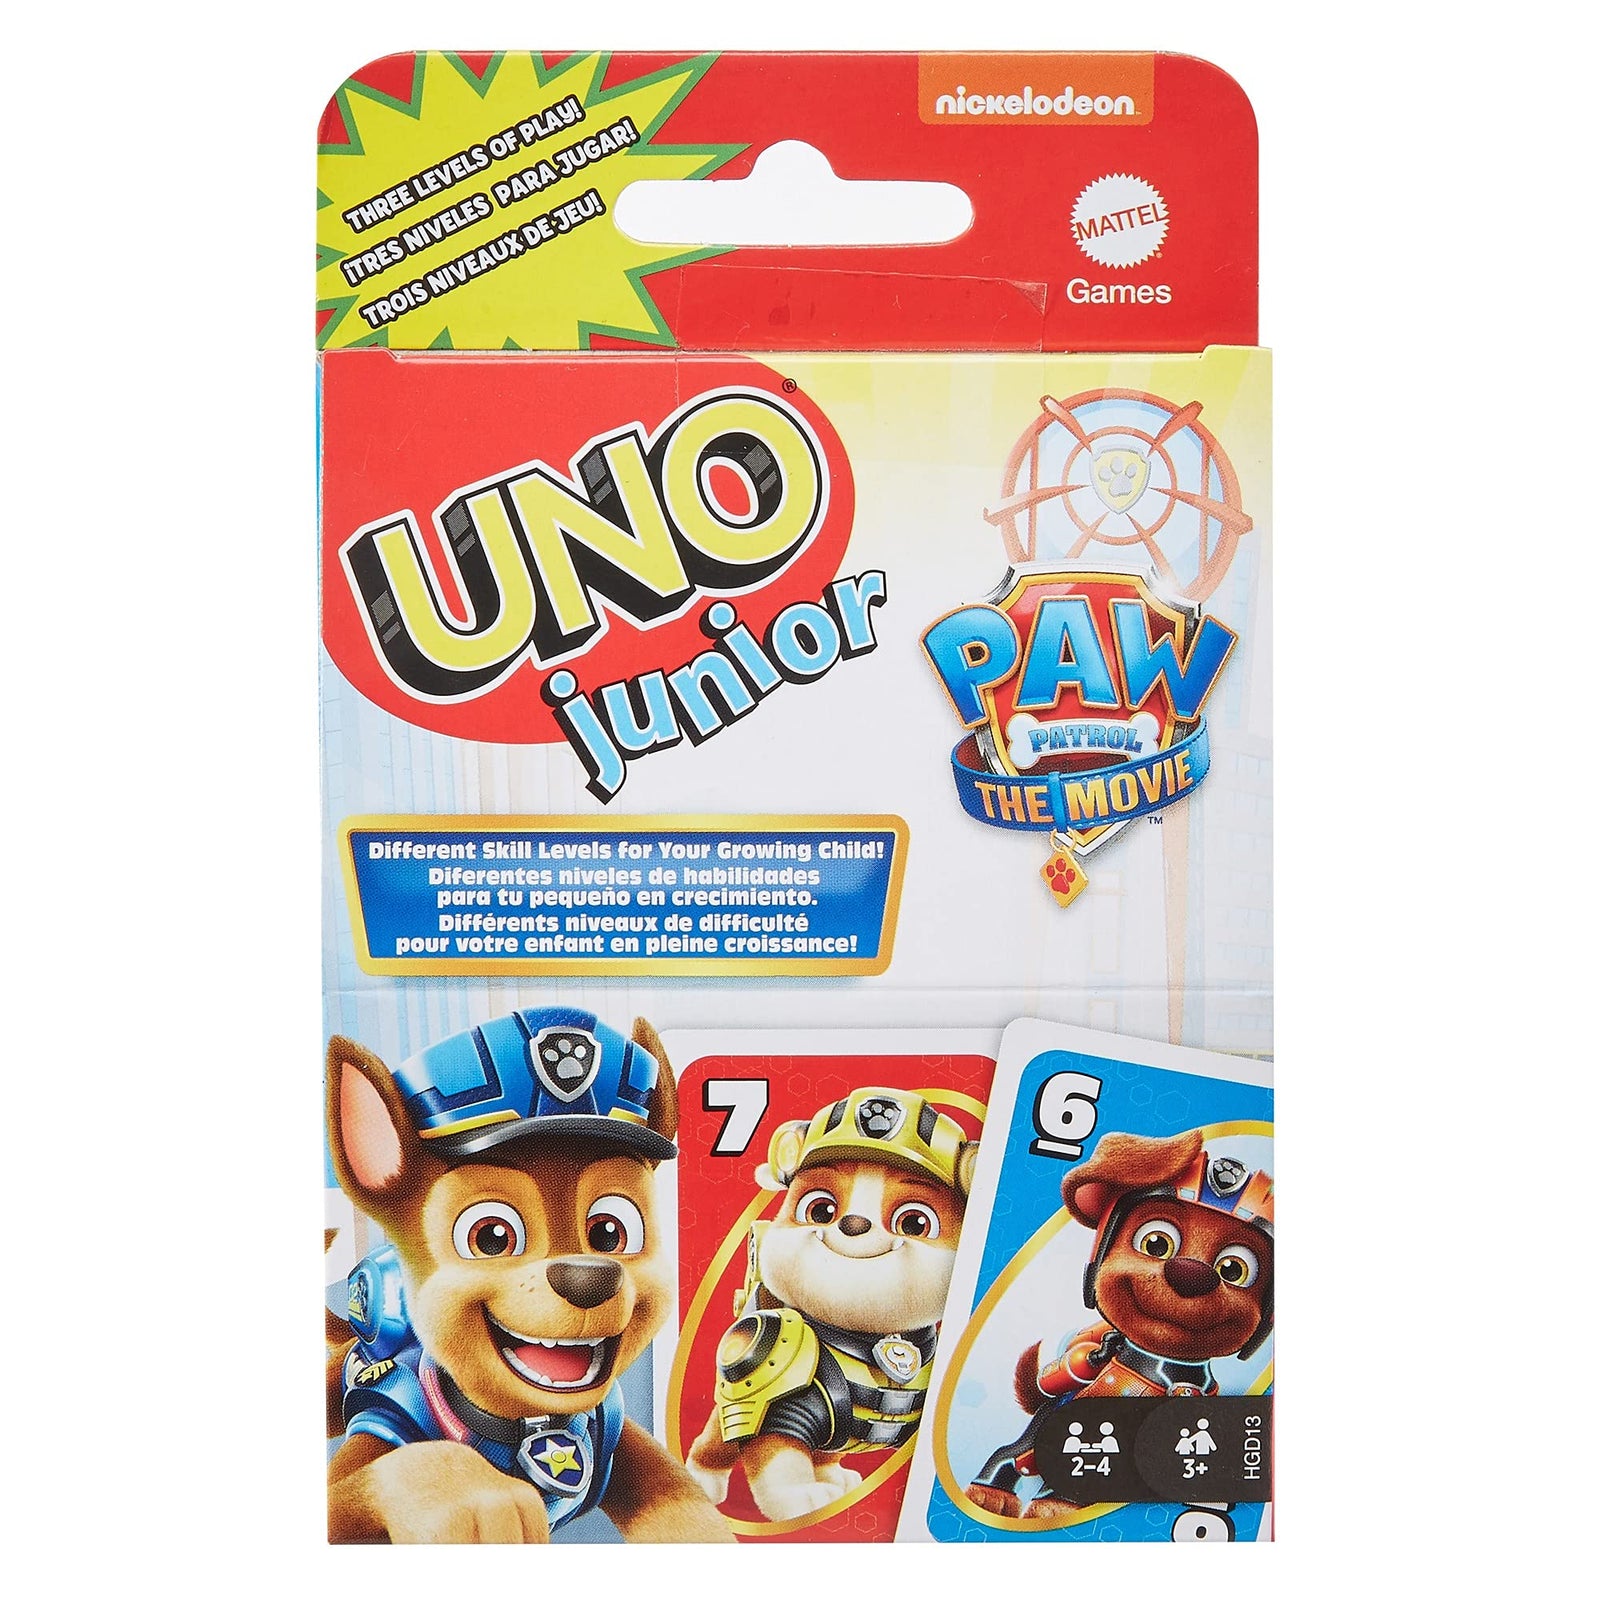 UNO Junior PAW Patrol Card Game with 56 Cards 2-4 Players, Gift for Kids 3 Years Old & Up,Multicolor,HGD13